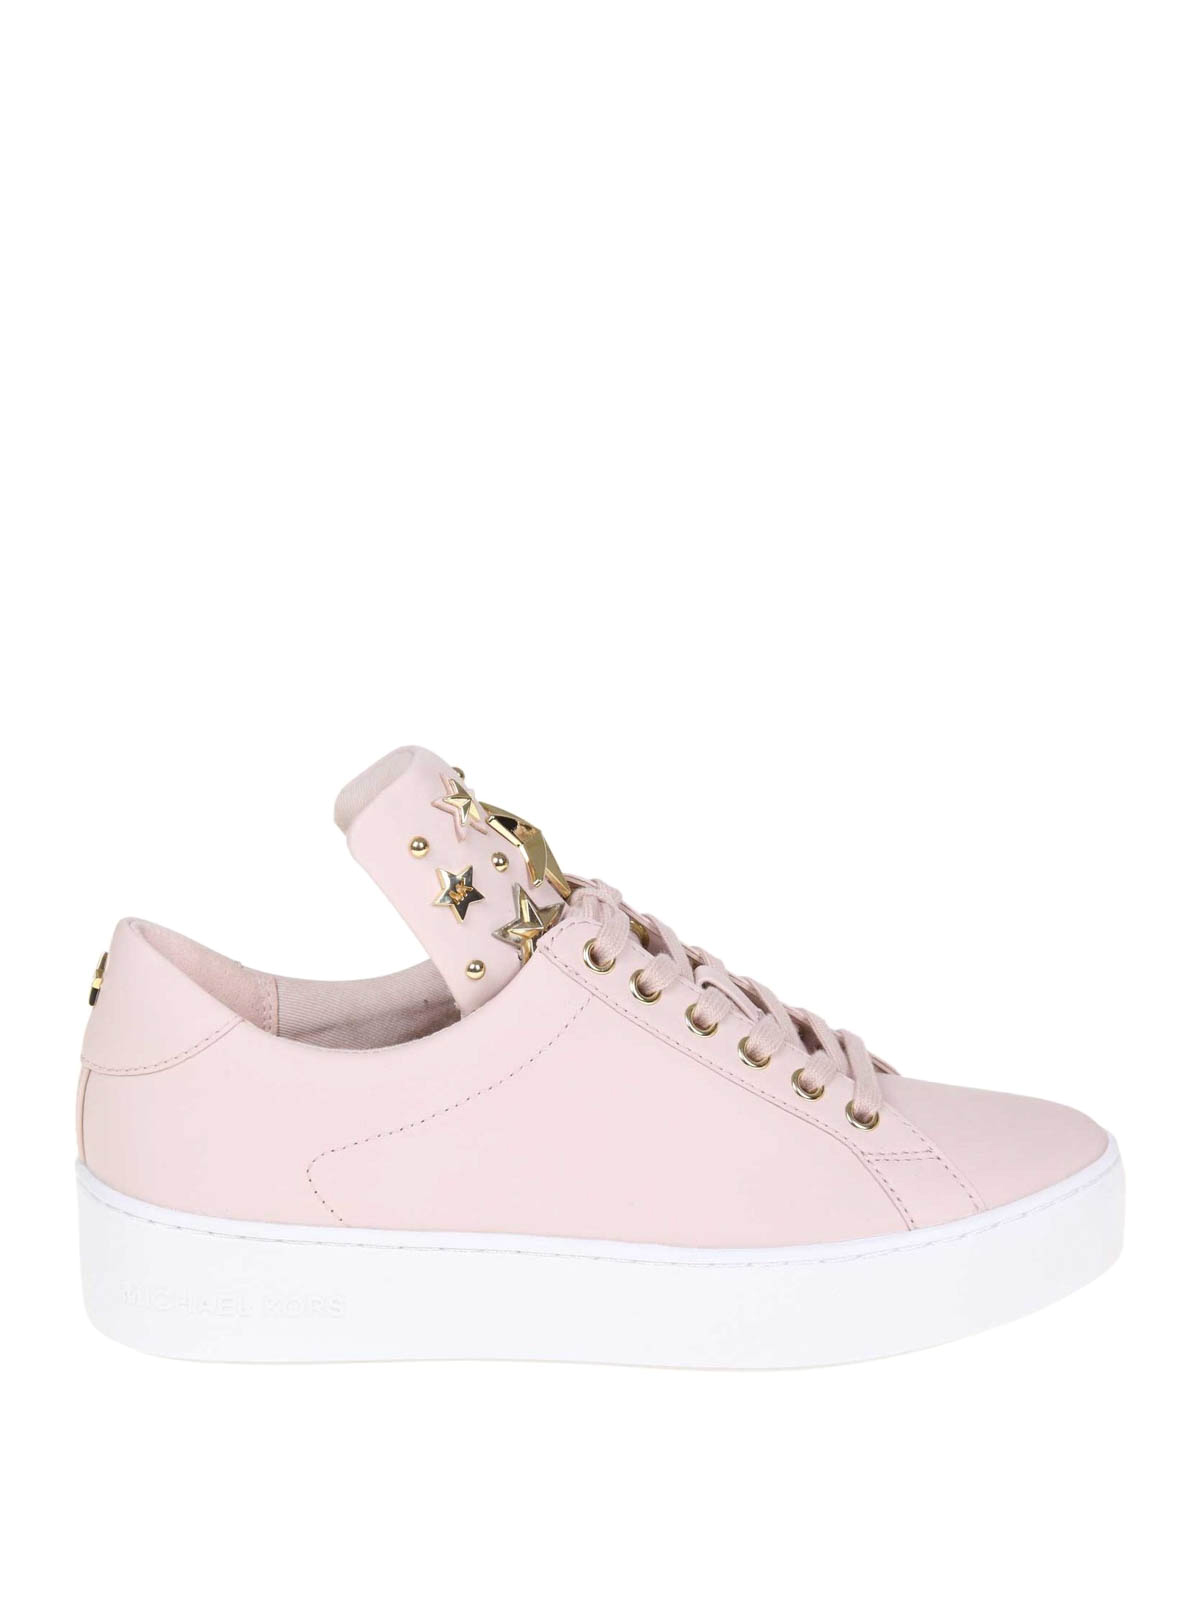 Mindy light pink leather sneakers 